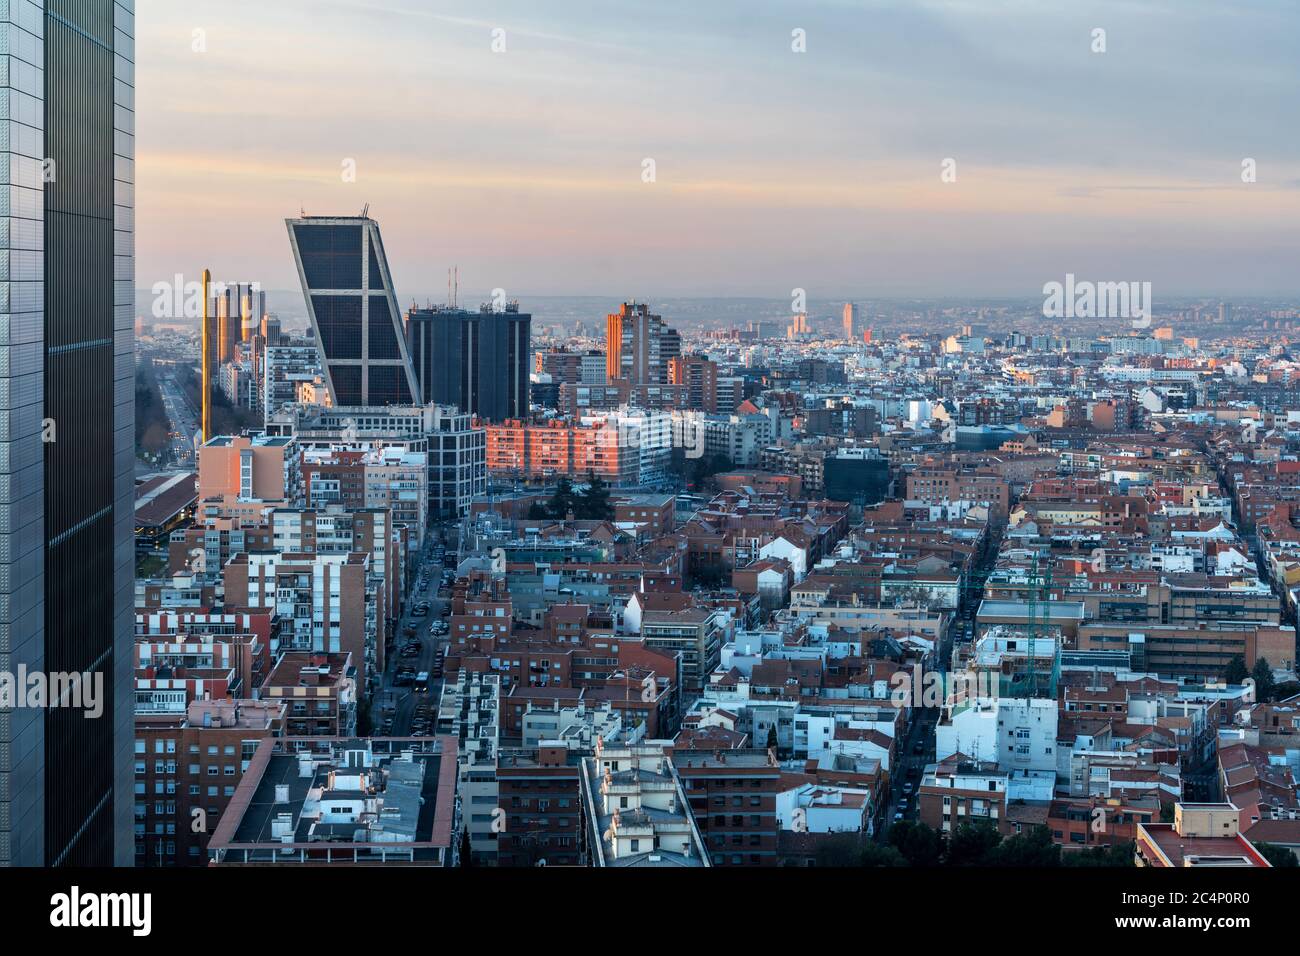 Aerial view of Castellana and Madrid's skyline at dawn, with the twin leaning modern office blocks (Puerta de Europa) in Plaza de Castilla to be recog Stock Photo